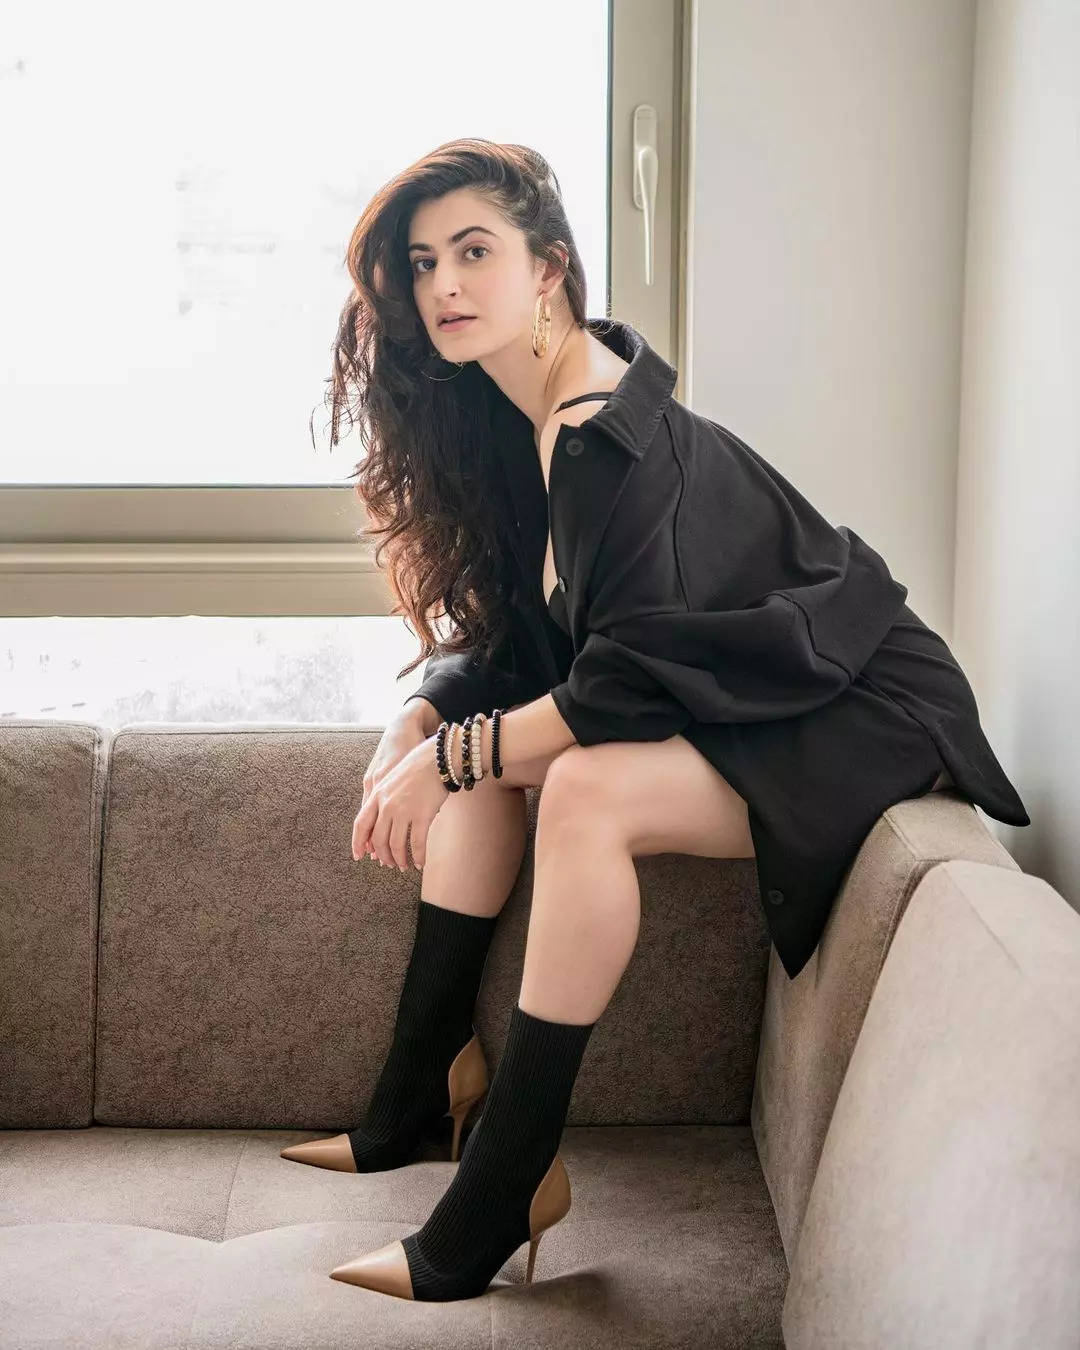 Shivaleeka Oberoi gives us major fashion goals with her stunning pictures!